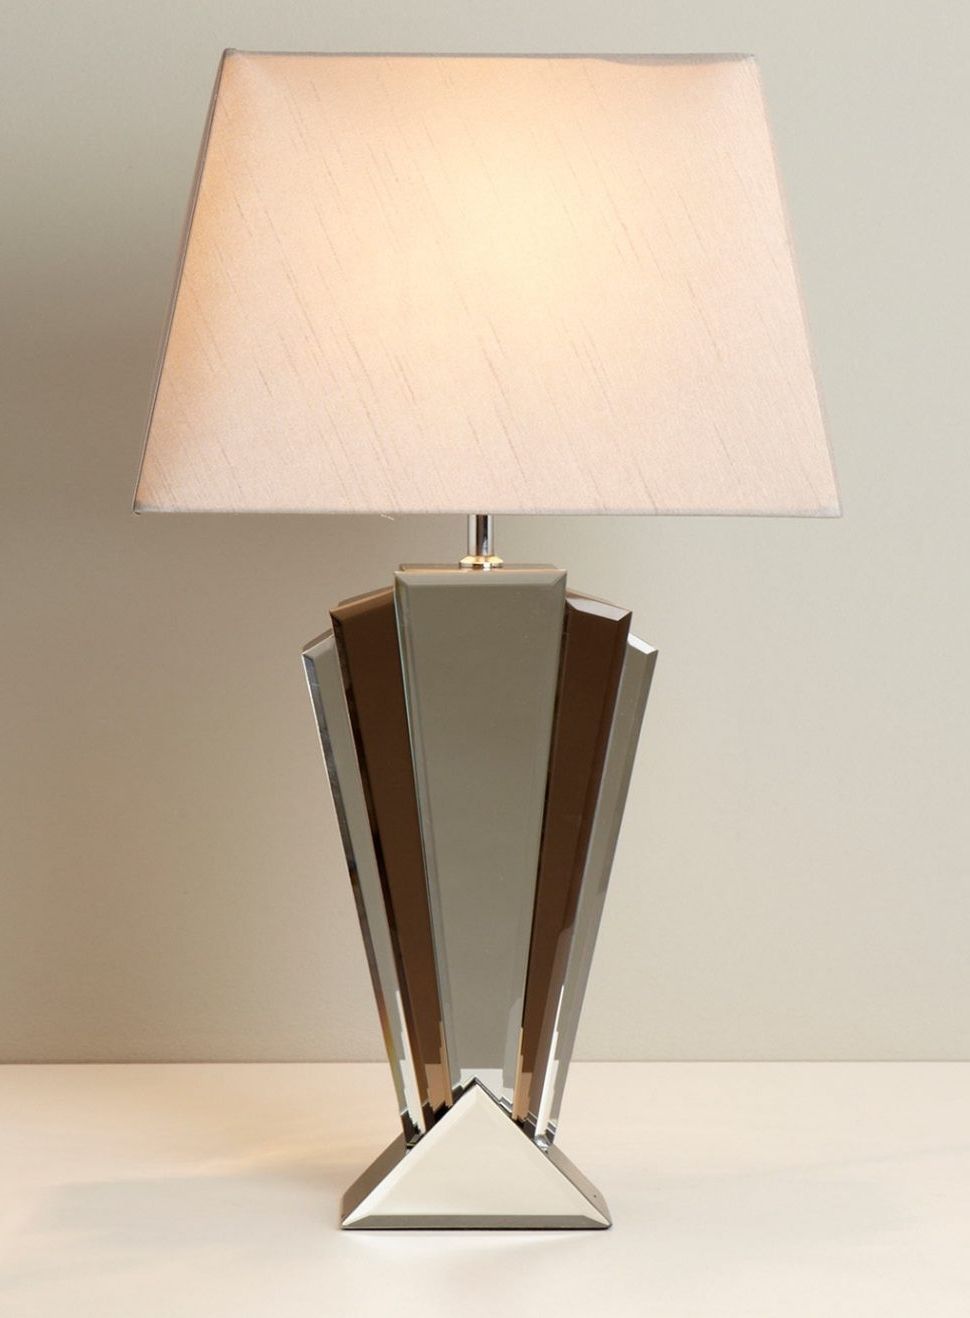 Preferred Table Lamps For Living Room At Ebay Intended For Livingroom : Buy Art Deco Table Lamps — Design The Categories Of (View 1 of 20)